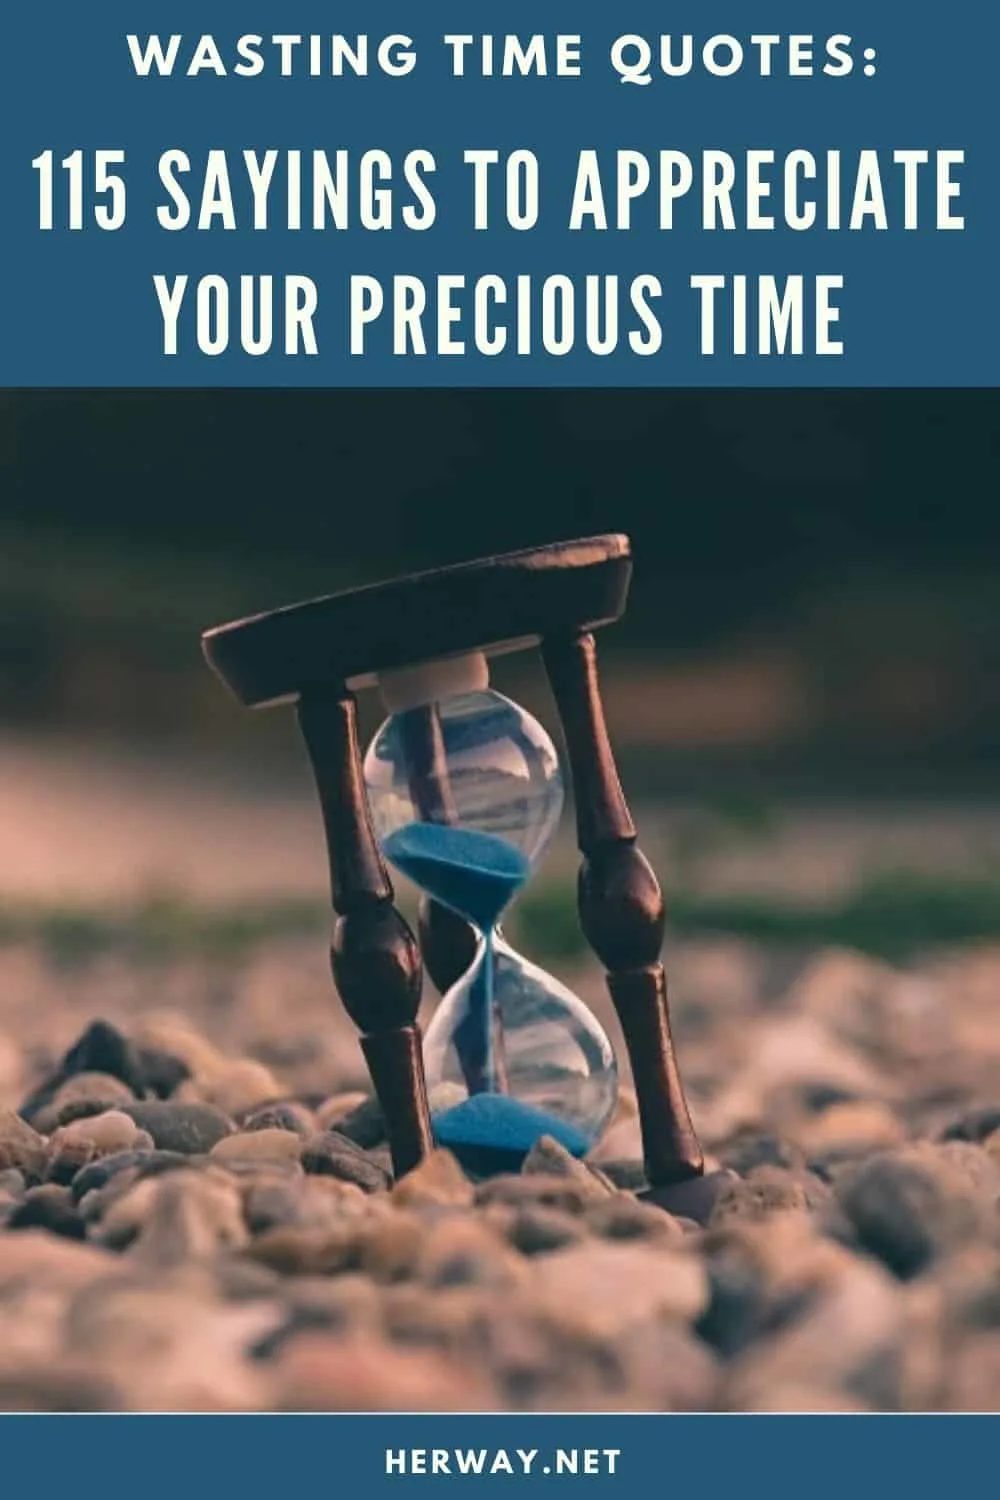 Wasting Time Quotes: 115 Sayings To Appreciate Your Precious Time pinterest